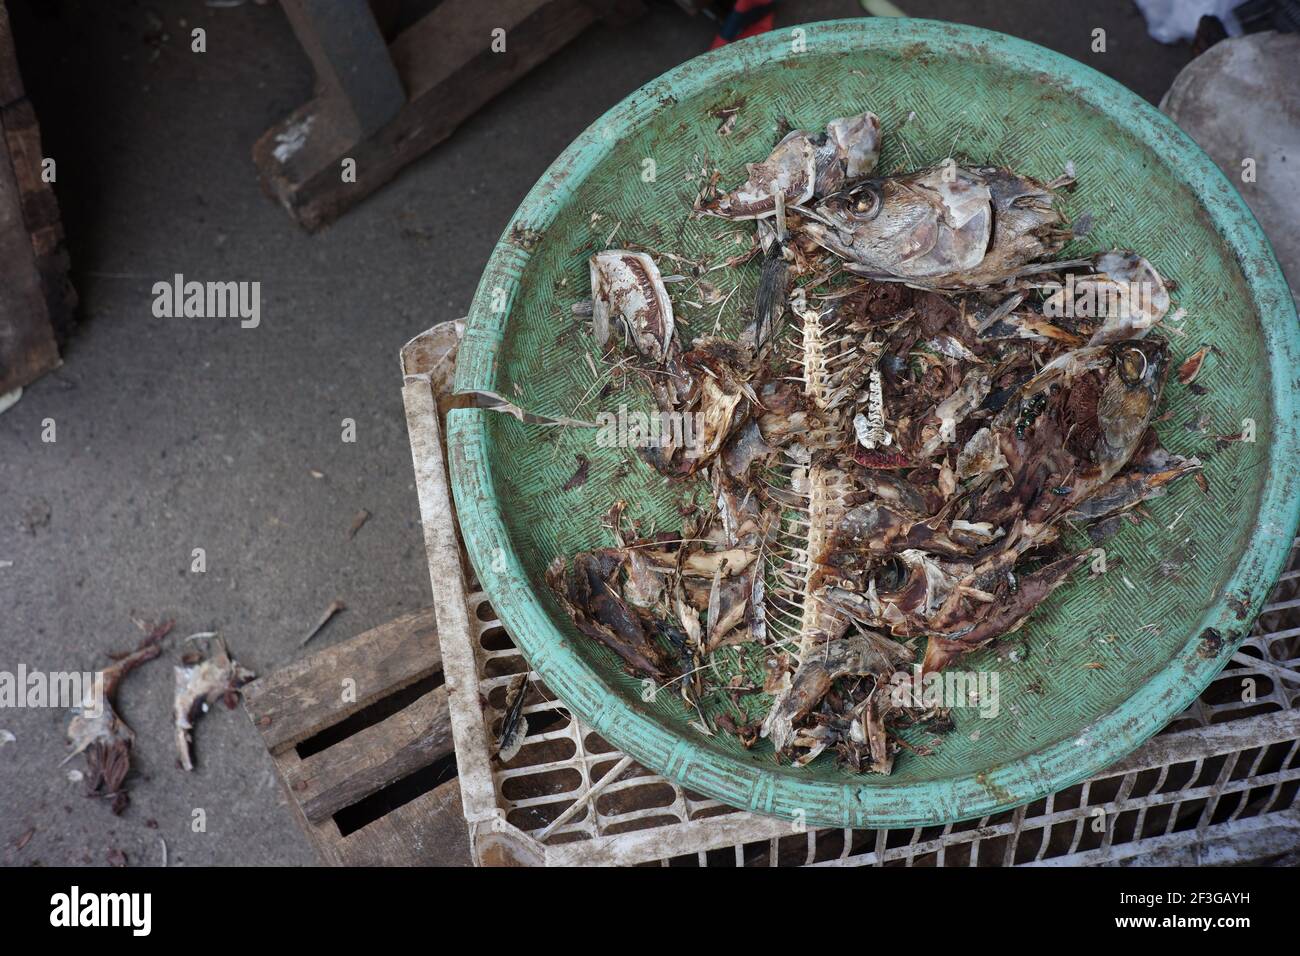 a collection of fish bones in a basket for cat food. food trash lying on the floor. dirty and smelly fish bones Stock Photo